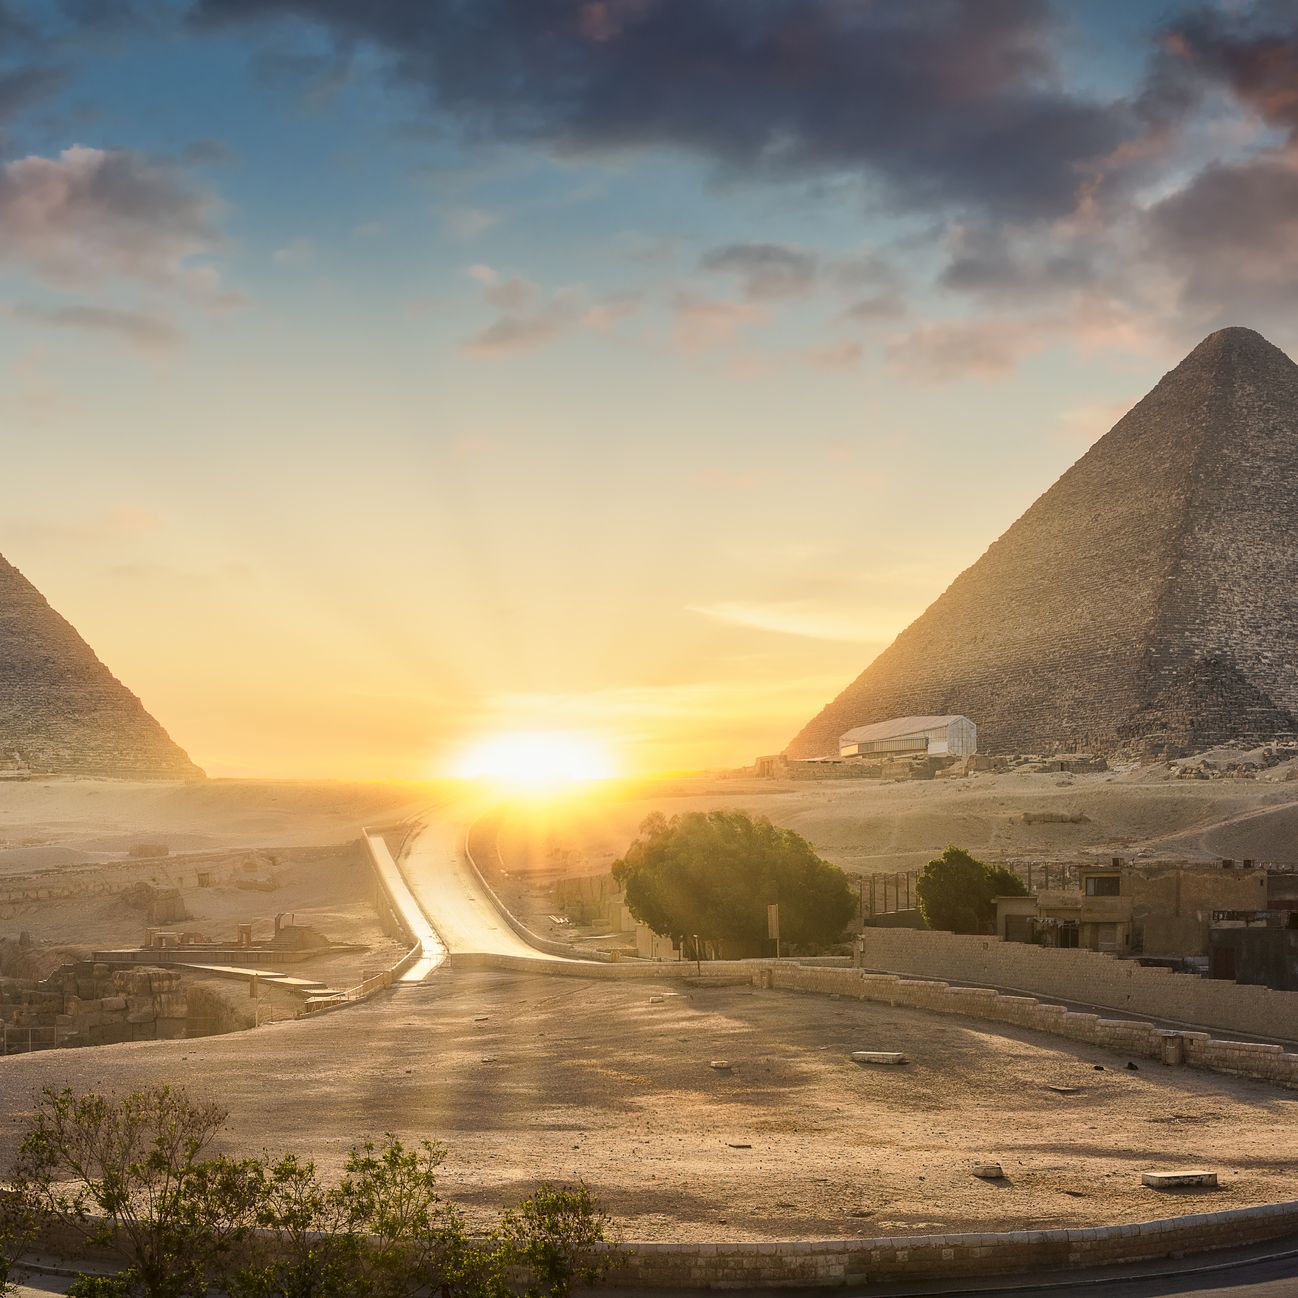 View of The Great Sphinx, Pyramid of Khafre and Great Pyramid of Giza at sunset, Cairo, Giza, Egypt